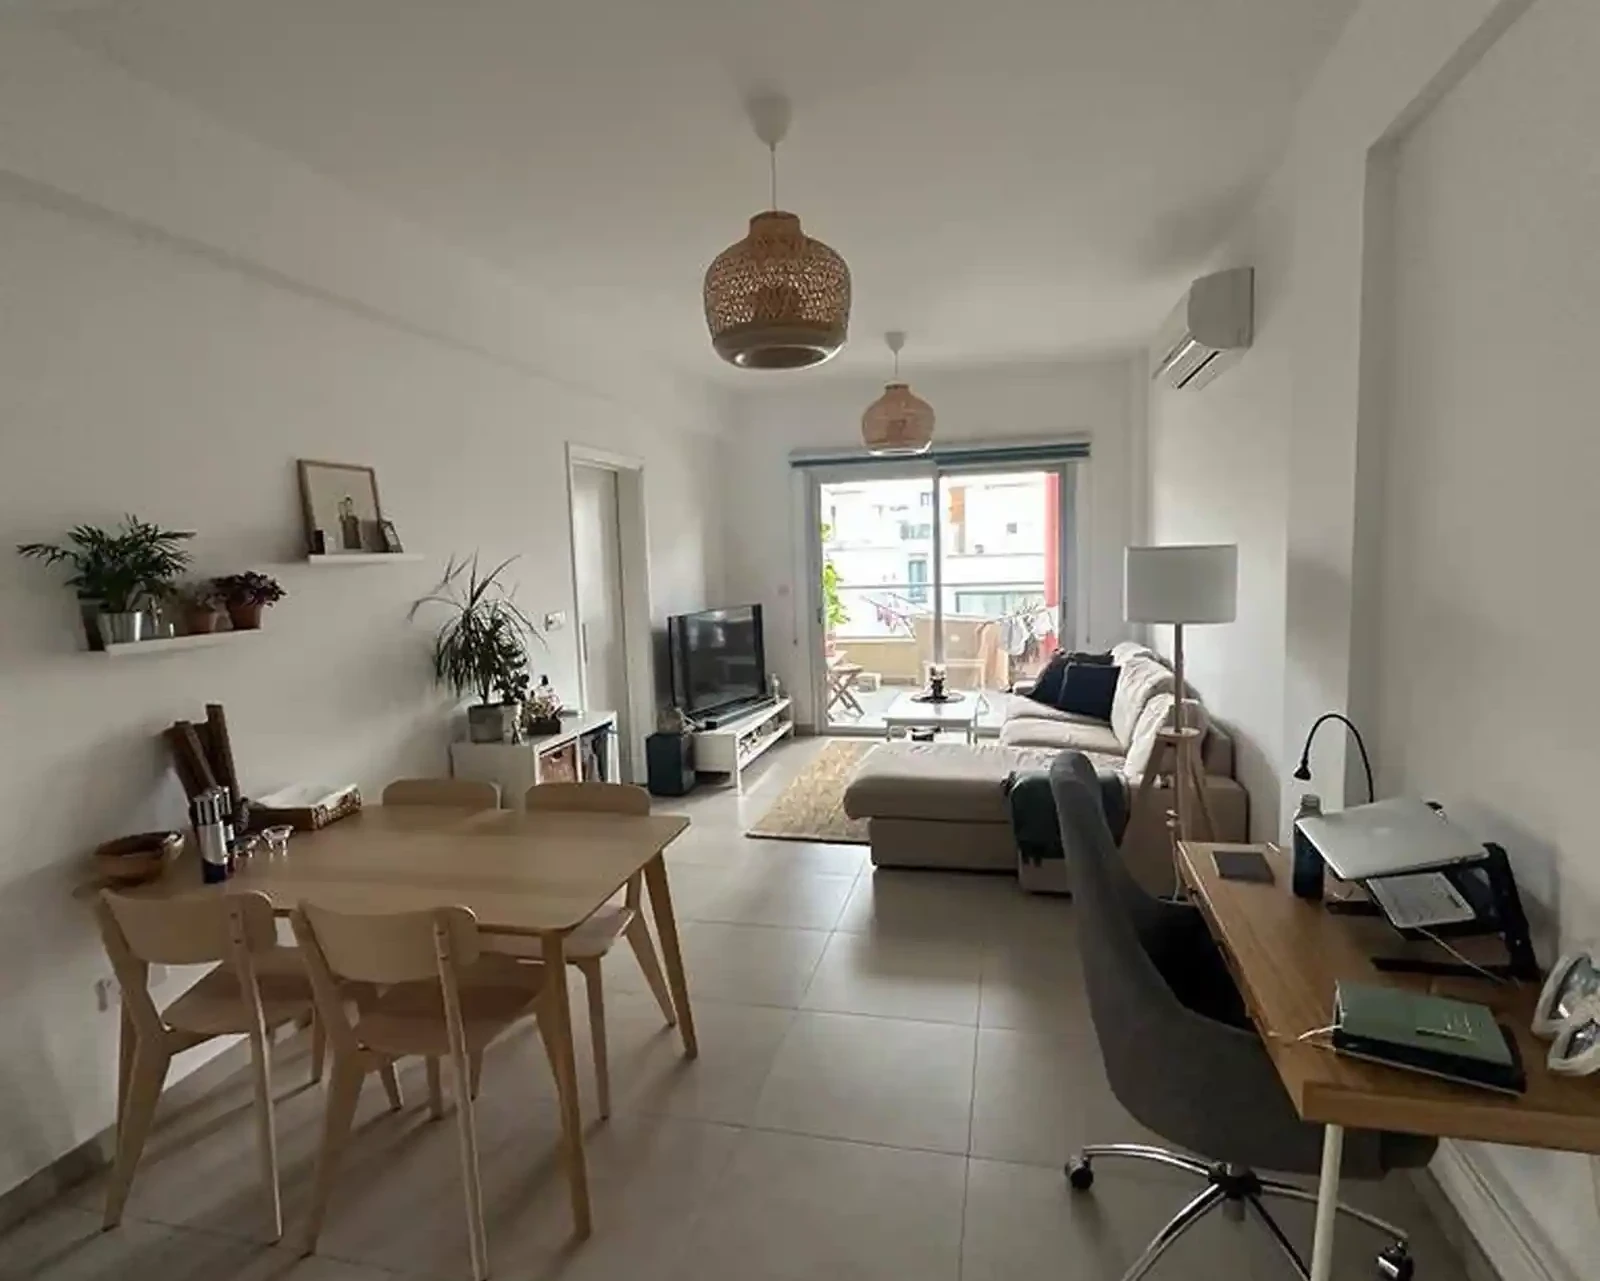 2-bedroom apartment to rent €1.700, image 1